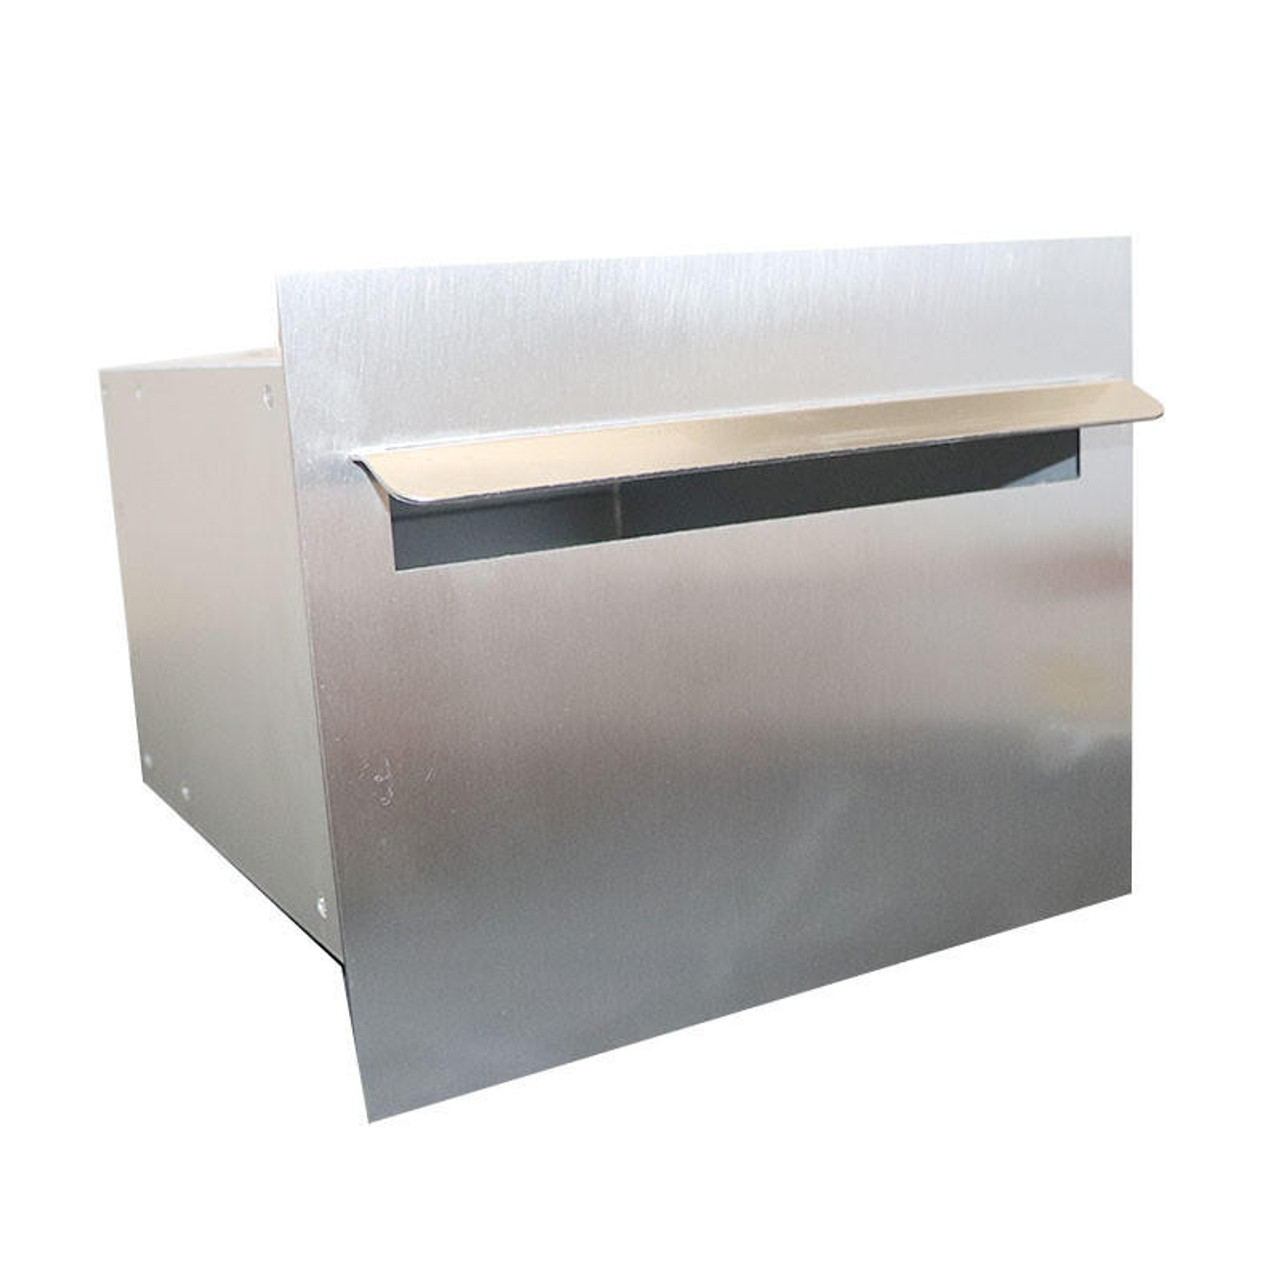 Mailmaster A4 Portrait Stainless Steel Back Opening Letterbox HGSSPBK